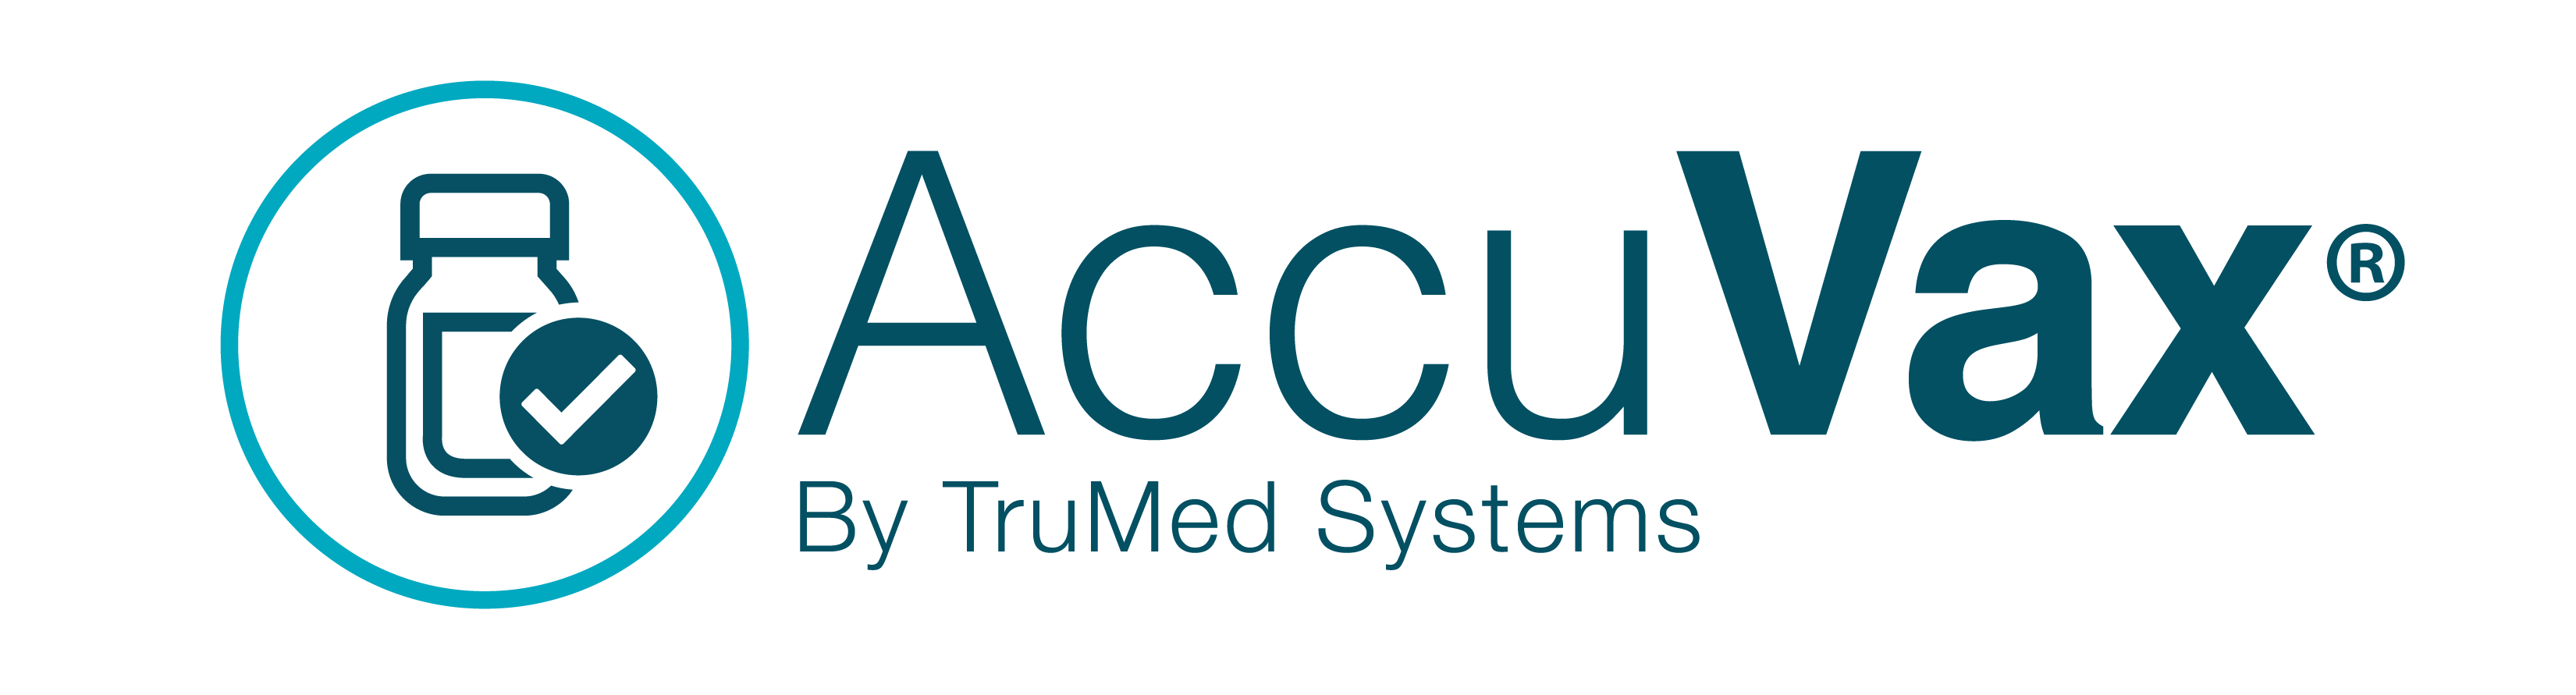 ACCUVAX LOGO by trumed 02